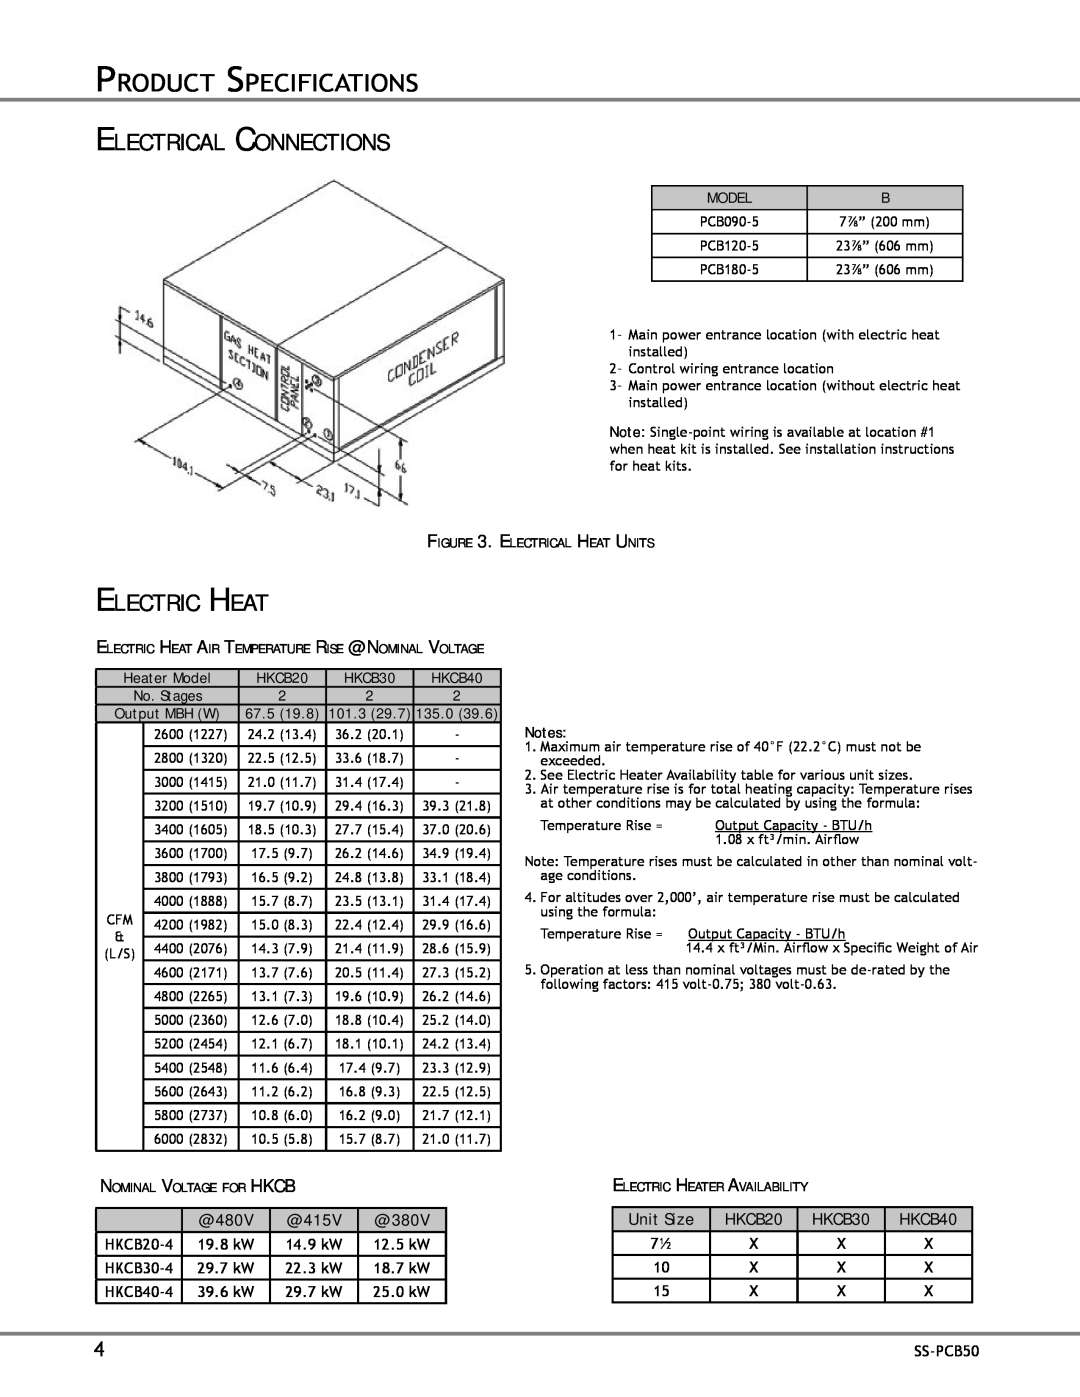 Goodman Mfg SS-PCB50 Electrical Connections, Electric Heat, Product Specifications, Unit Size, HKCB20, HKCB30, HKCB40 